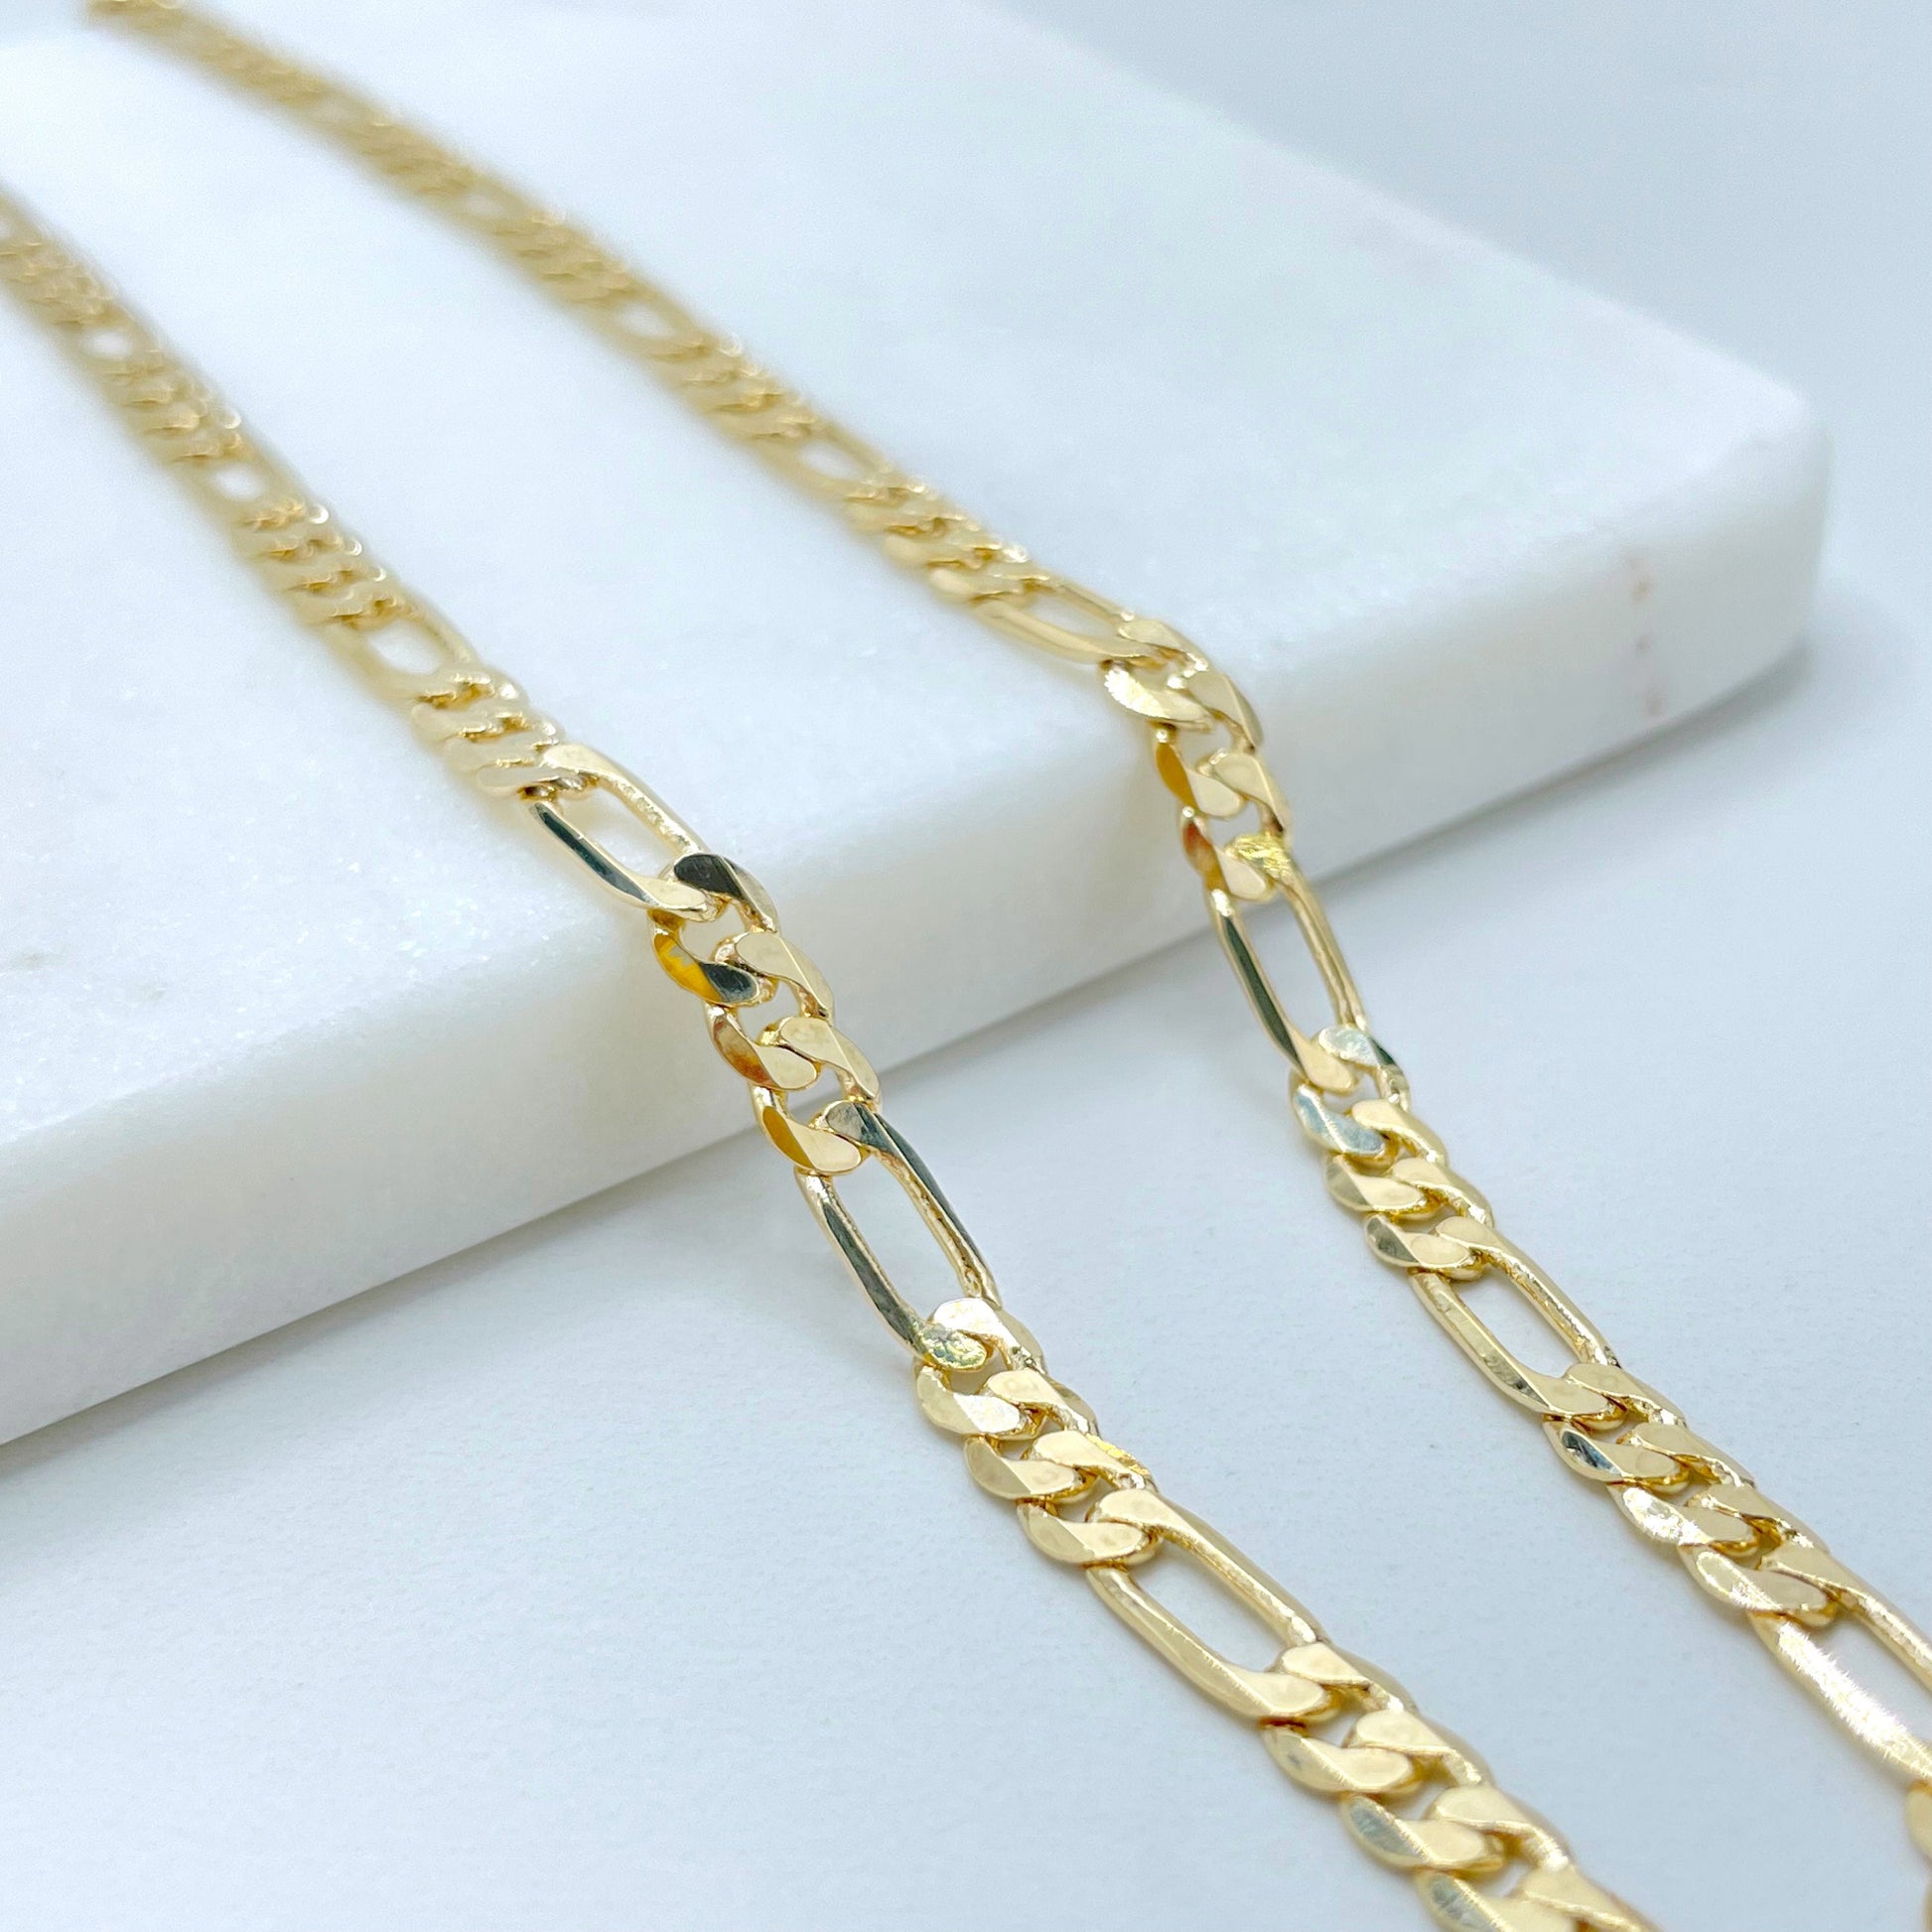 18k Gold Filled 4mm Figaro Link, 18'', 20'', 22'', 24 inches of length, Chains Wholesale and Jewelry Supplies